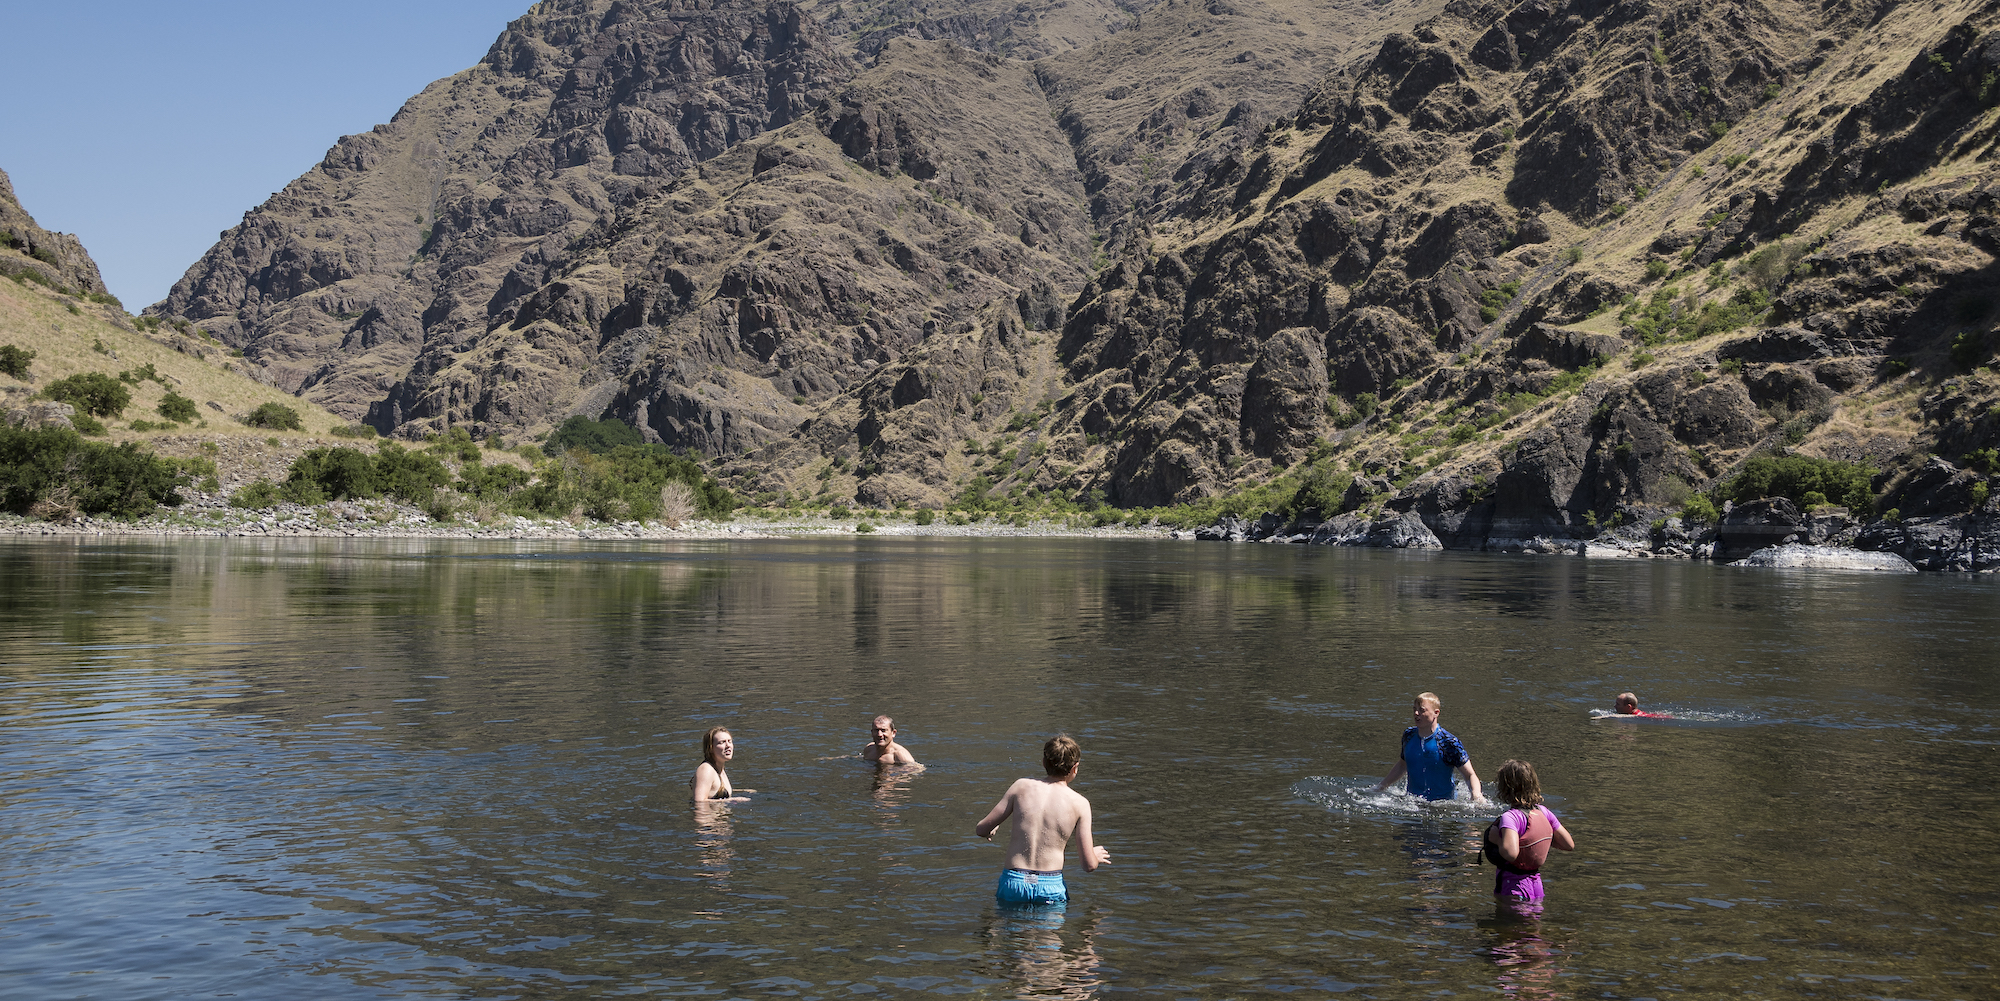 A group of people swimming and bathing in the Snake River